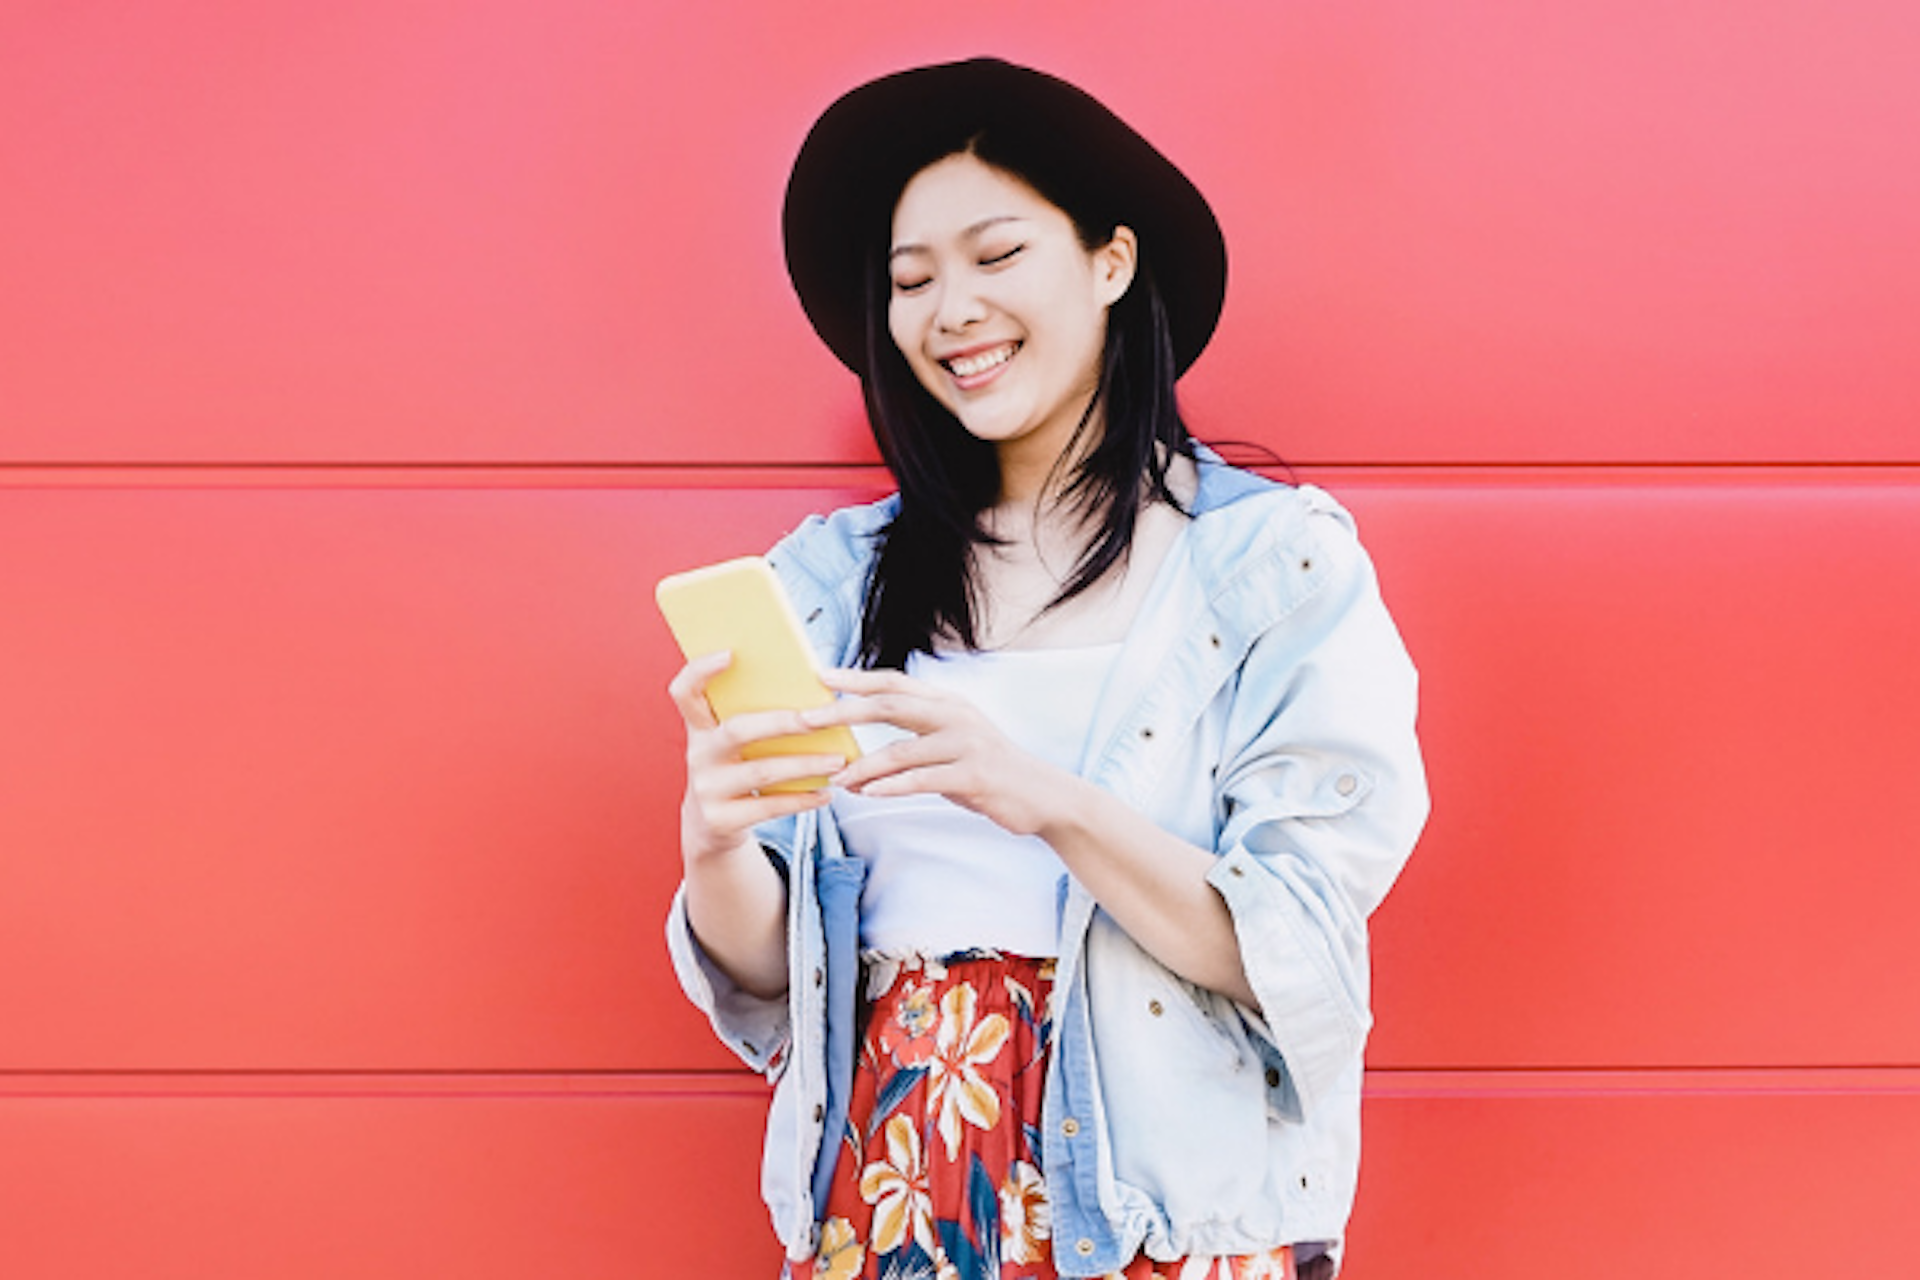 Young, smiling woman looking at her cell phone.